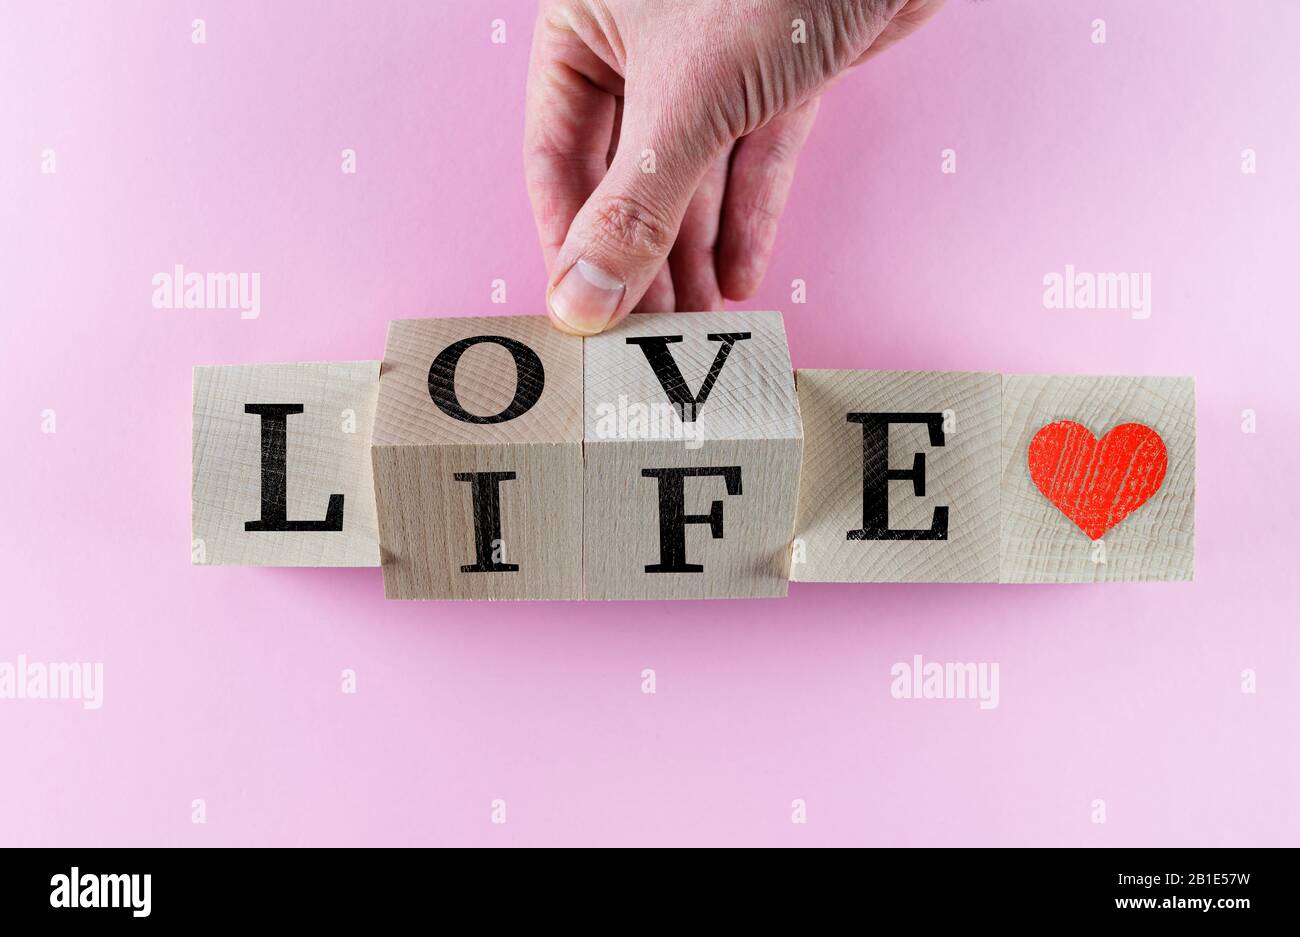 hand turning wooden toy blocks with words LOVE LIFE and red heart symbol on pink packground Stock Photo